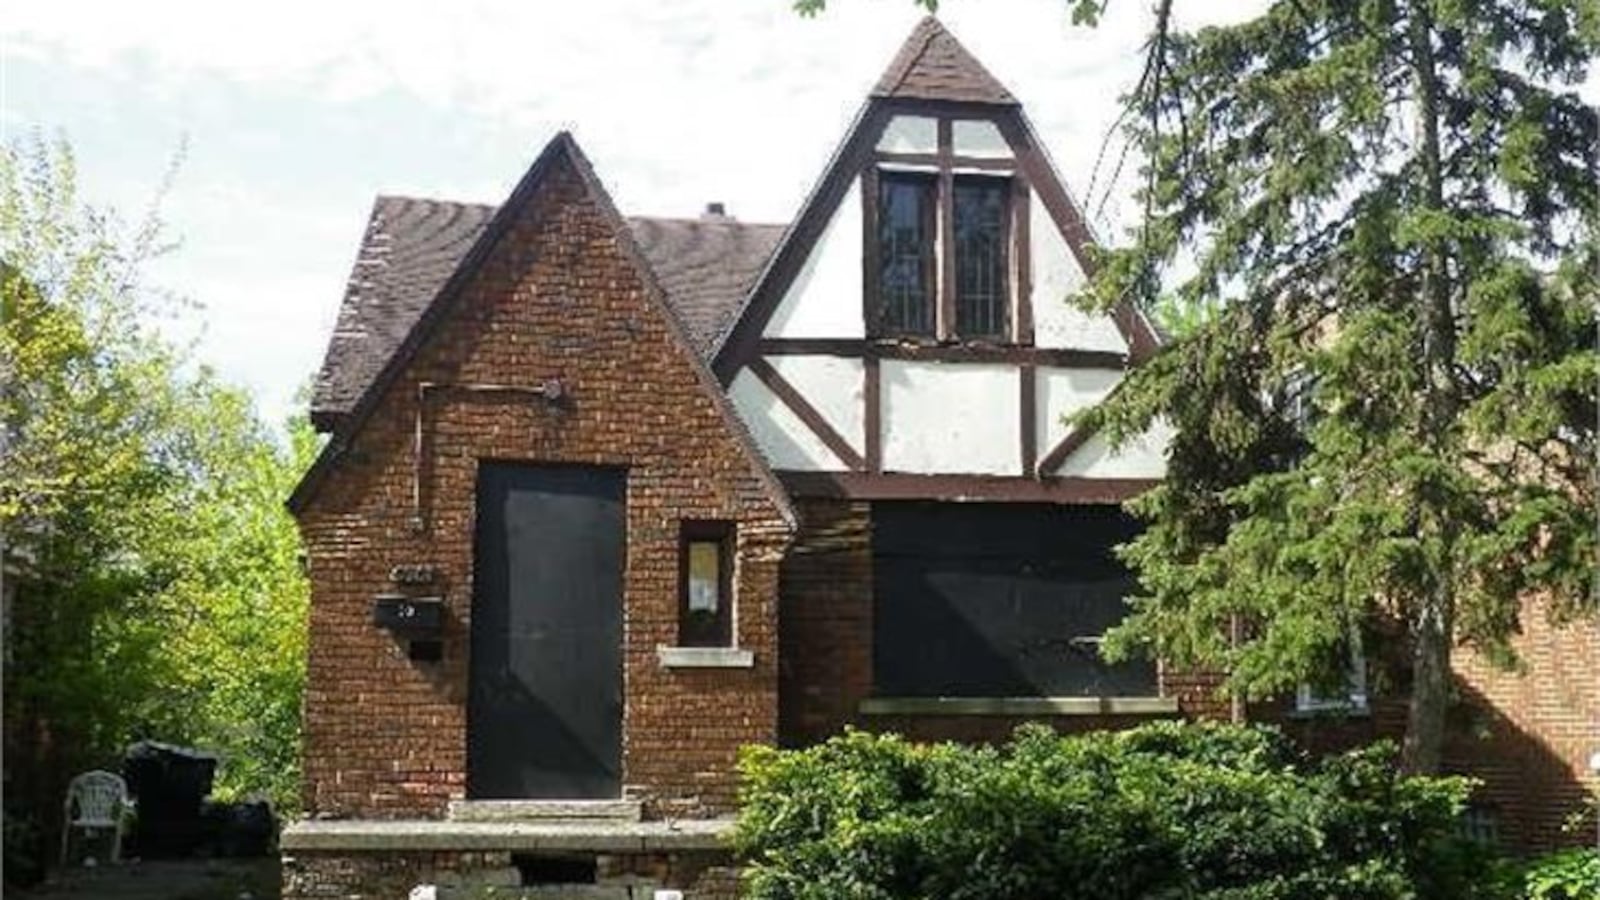 This home on Harvard Road was up for auction the week after Detroit announced a half-off-on-city-owned housing deal for teachers.